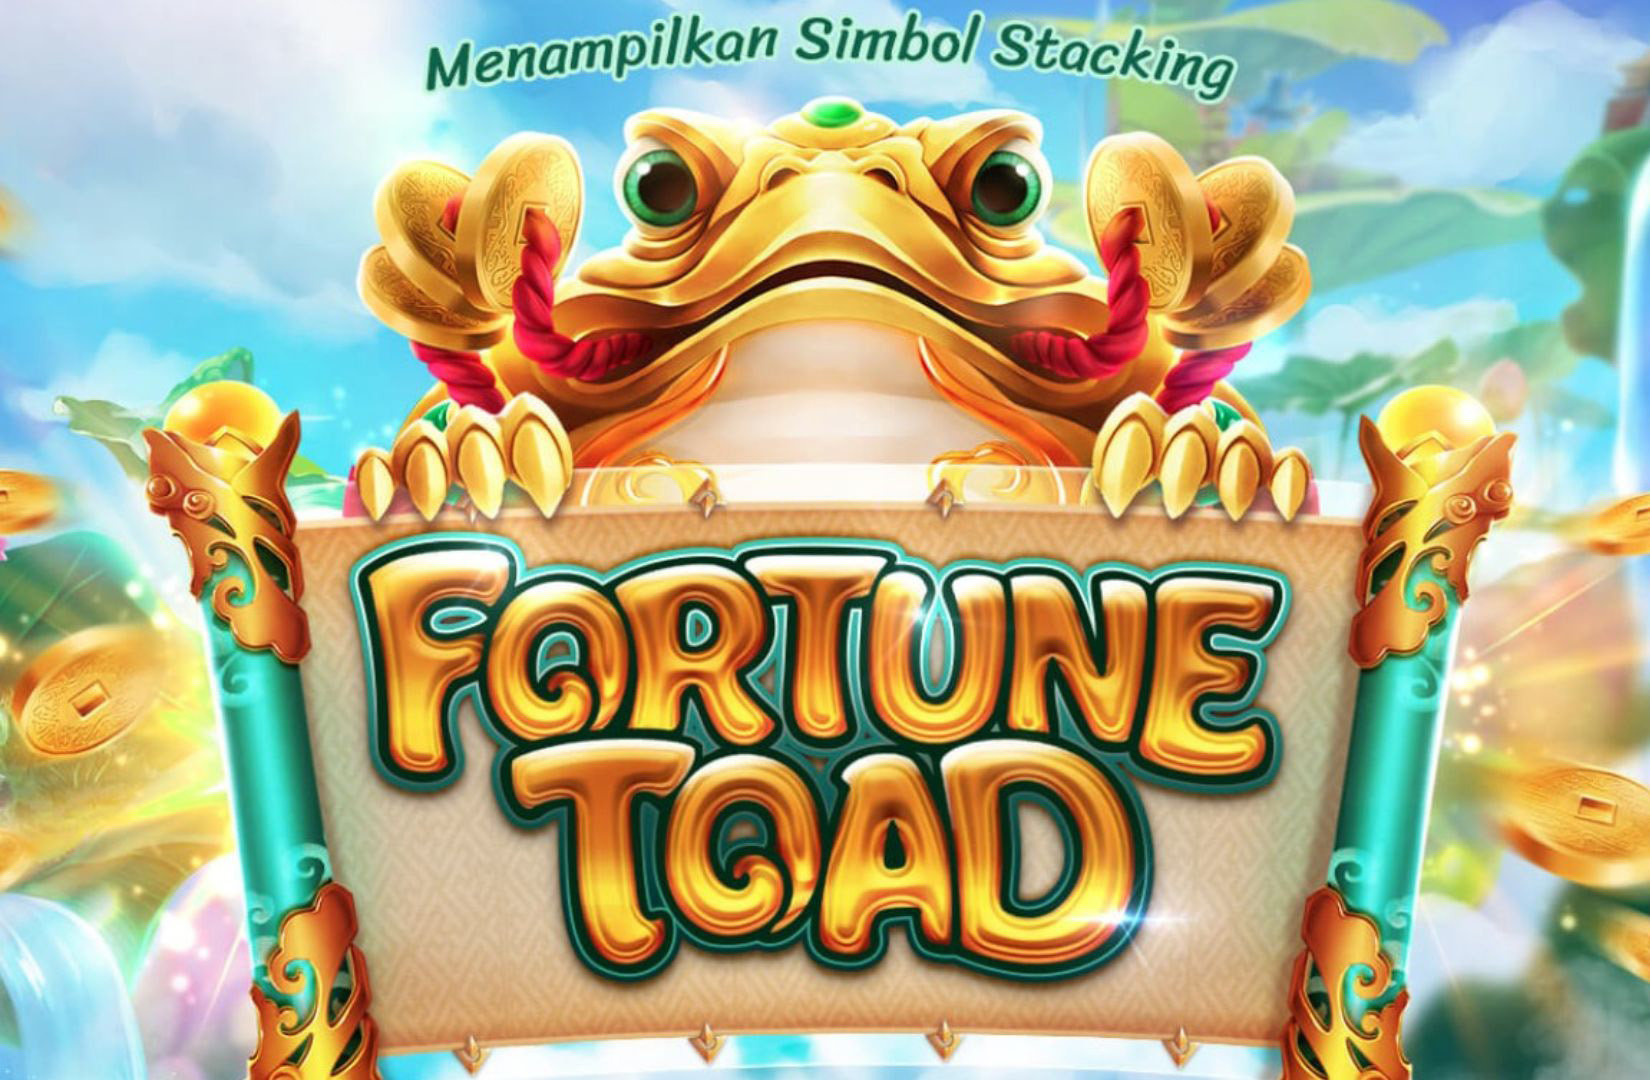 game slot online fortune toad